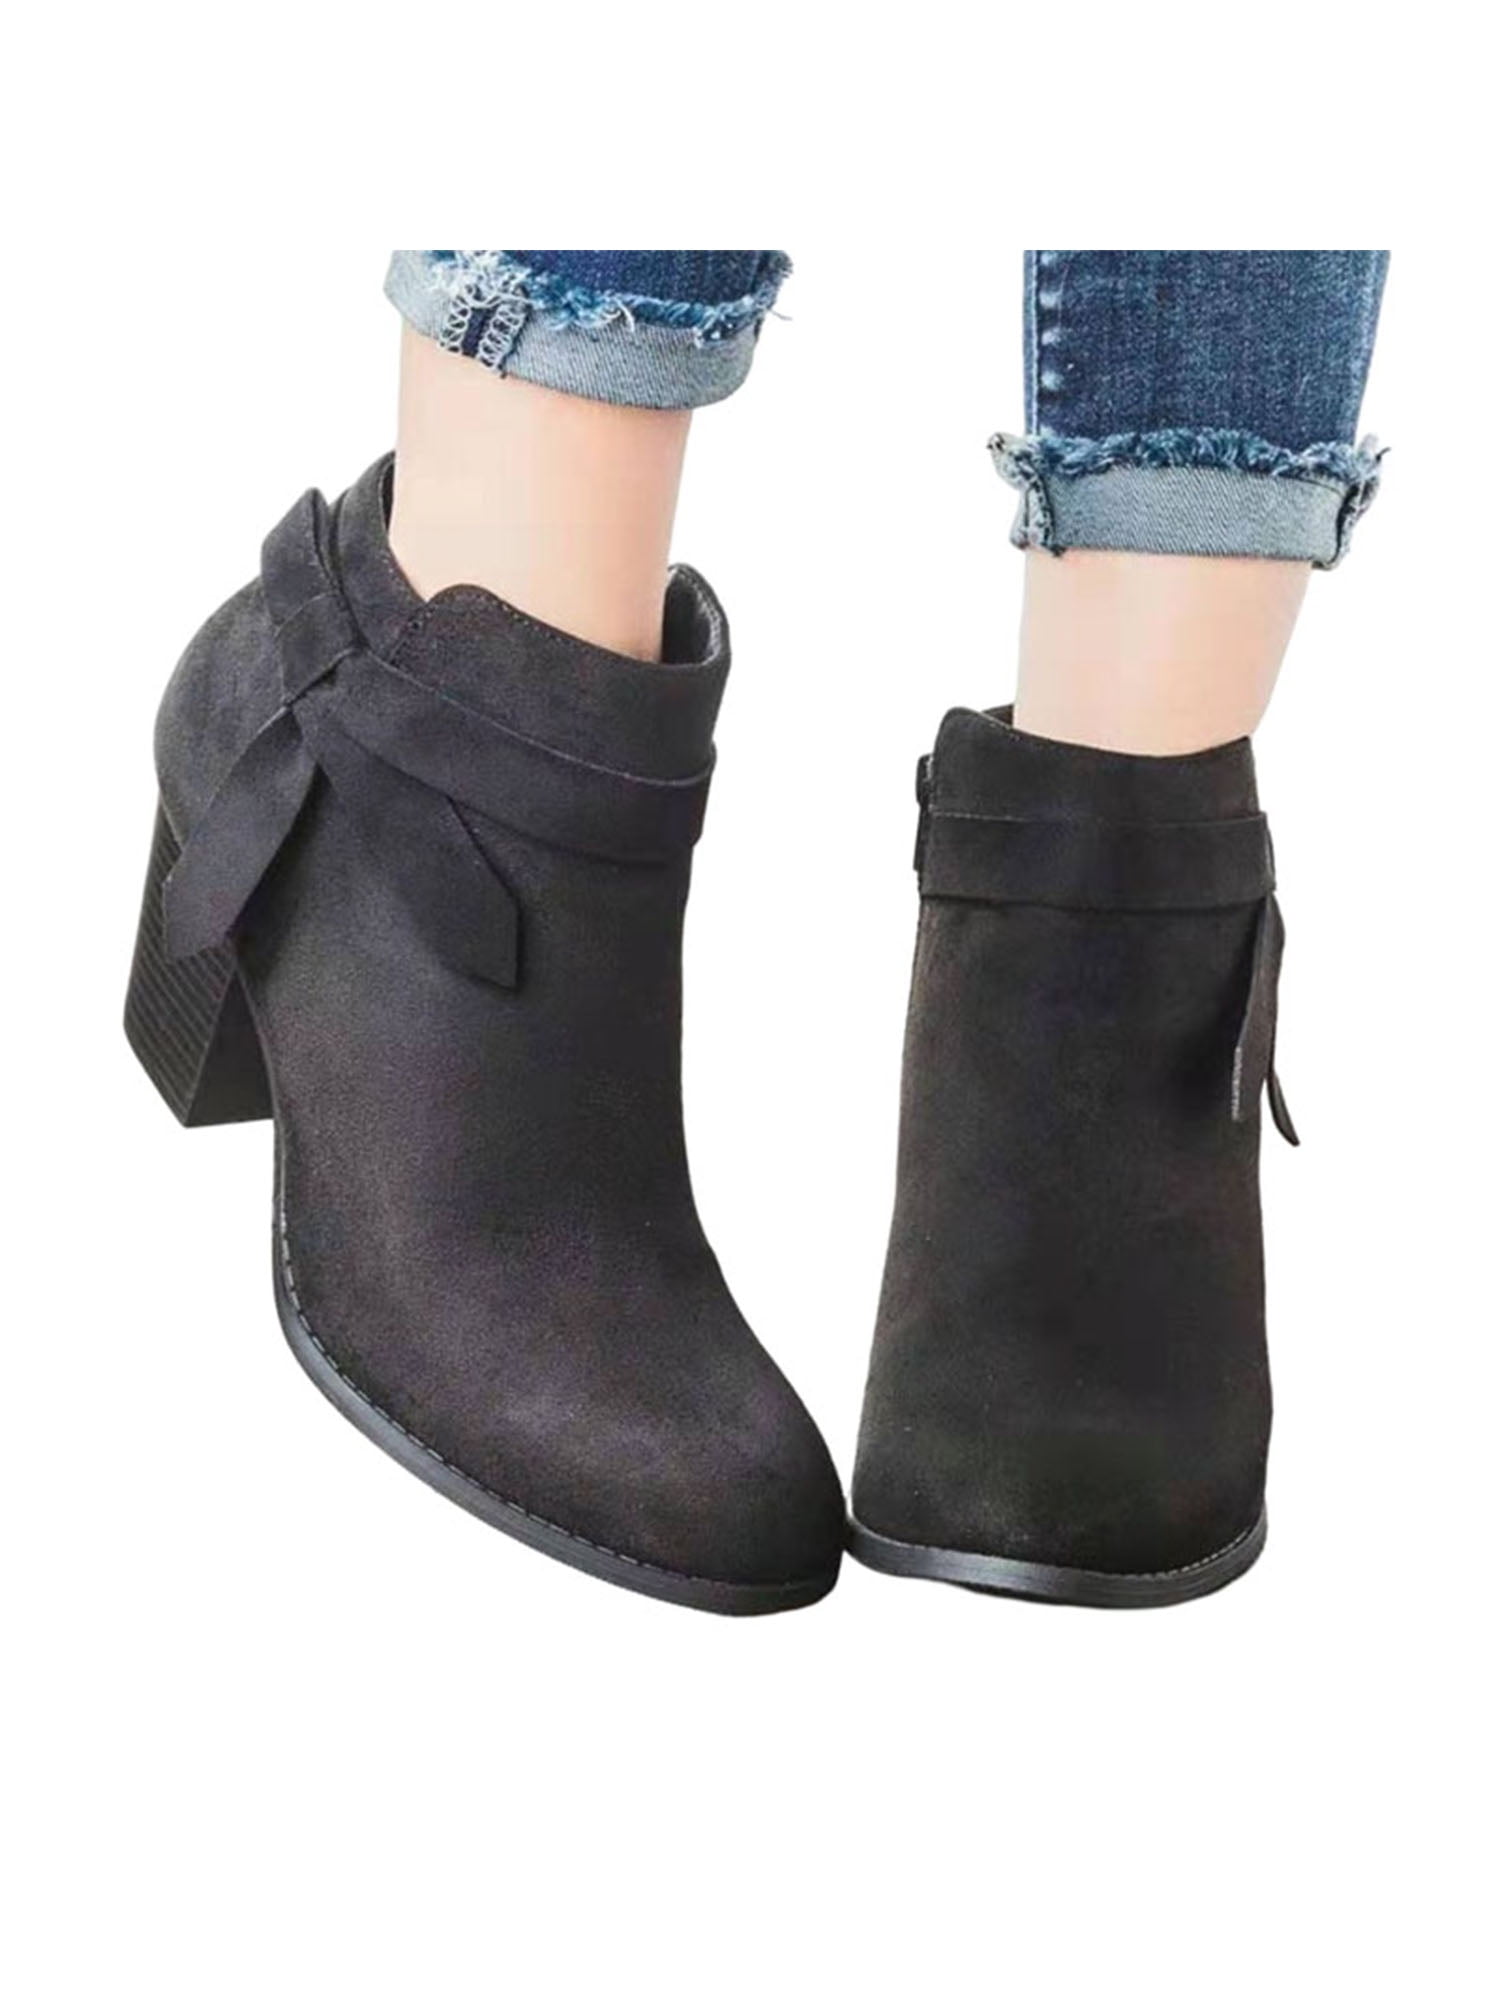 NEW Women Fashion Shoes Ankle Boots High Heels Platform Booties Casual Round Toe